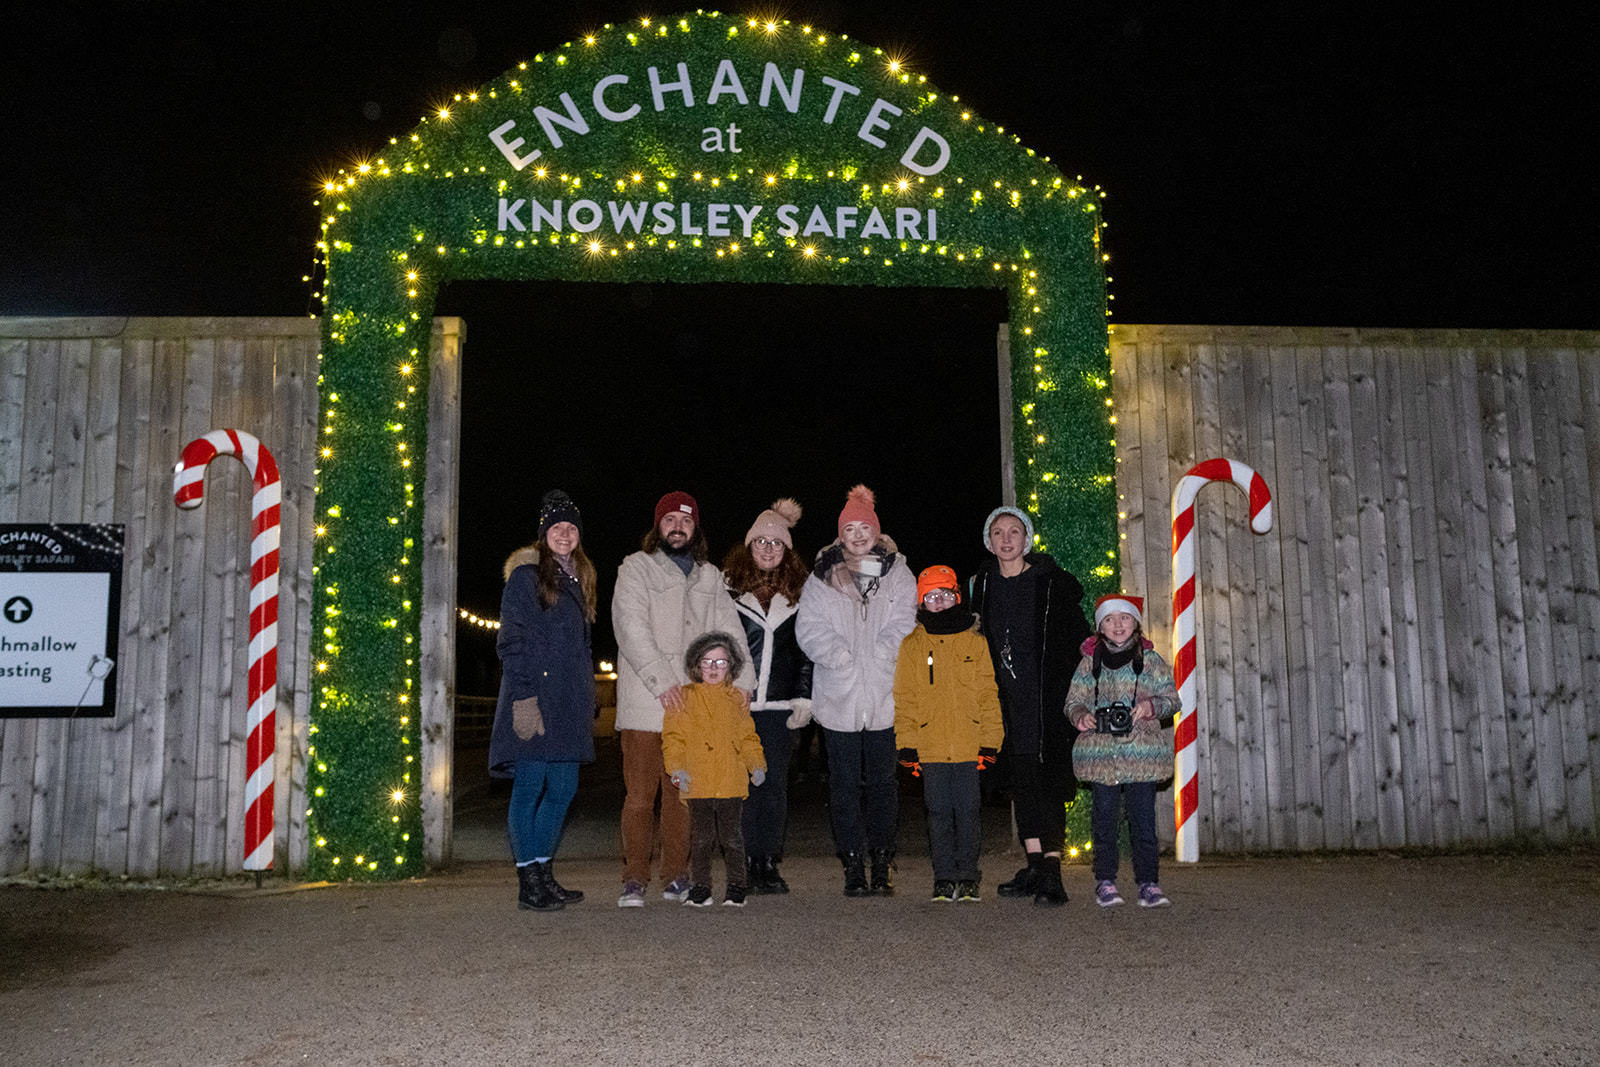 A group of people in woolly hats stand under a entrance that reads "Enchanted at Knowsley Safari"